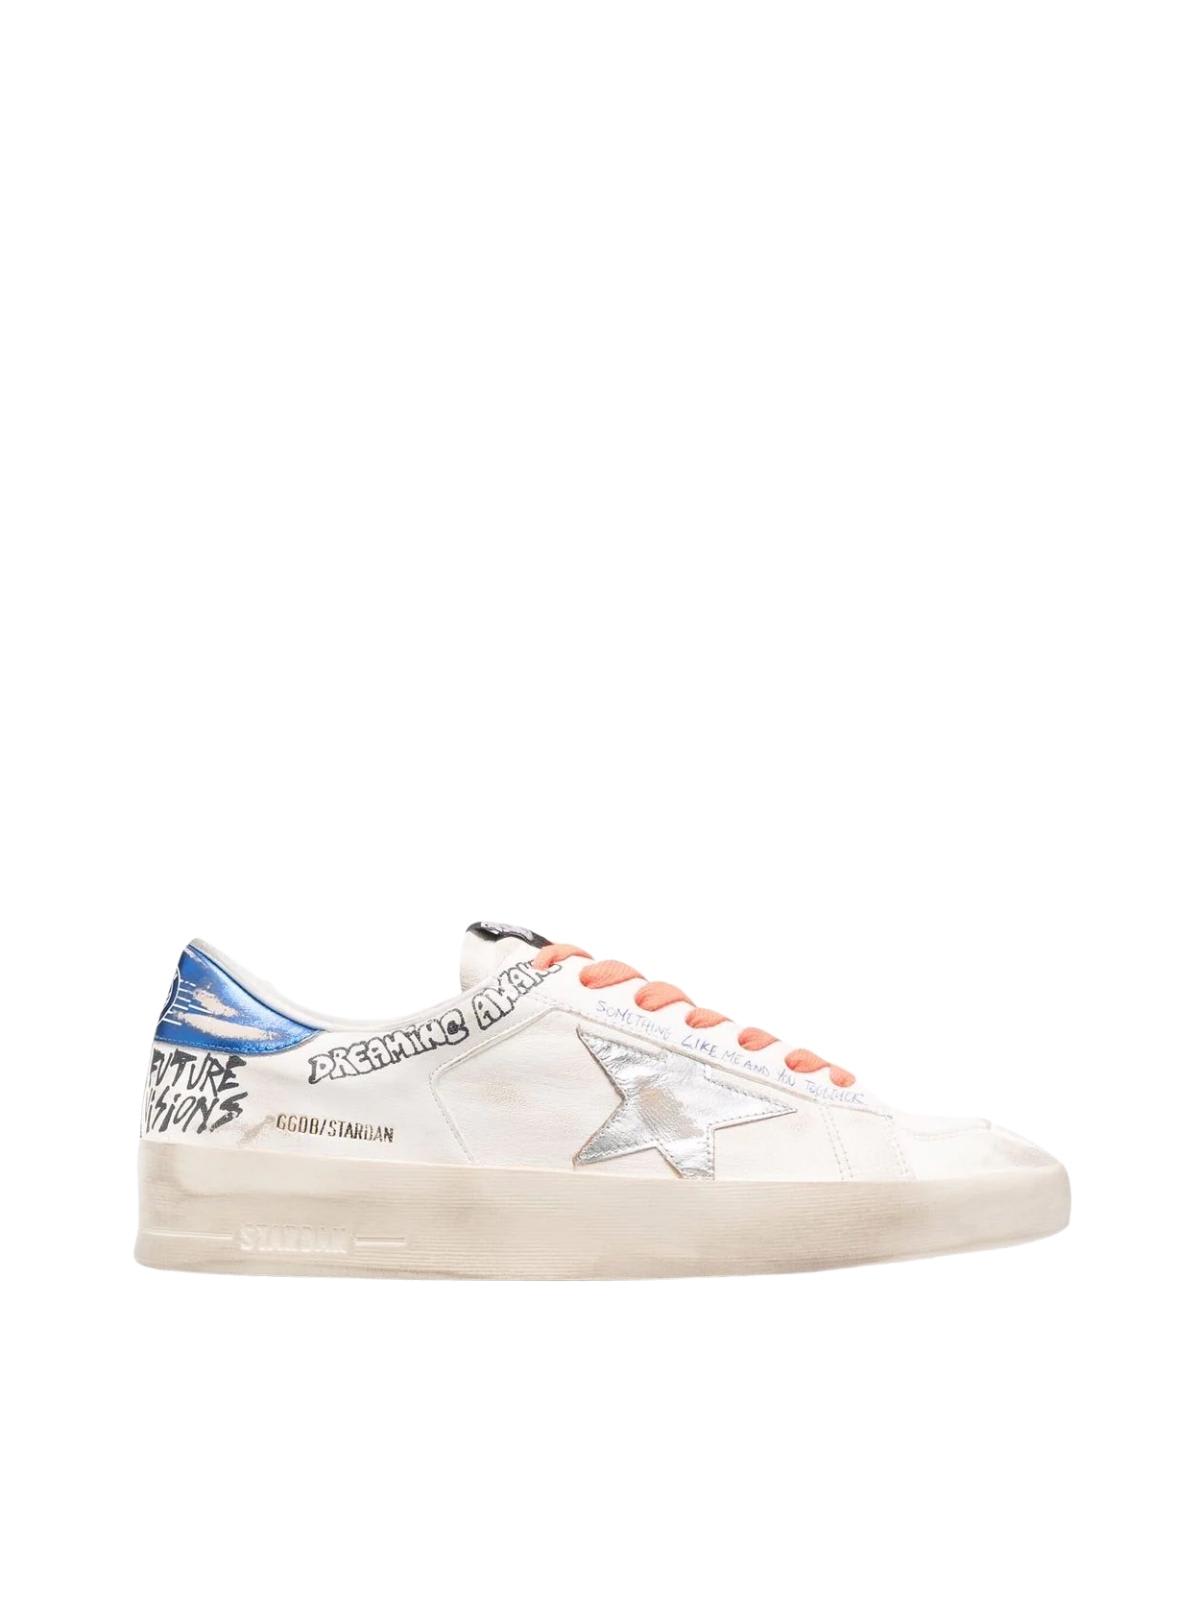 Golden Goose Stardan Nappa With Serigraphs Upper Laminated Star And Heel